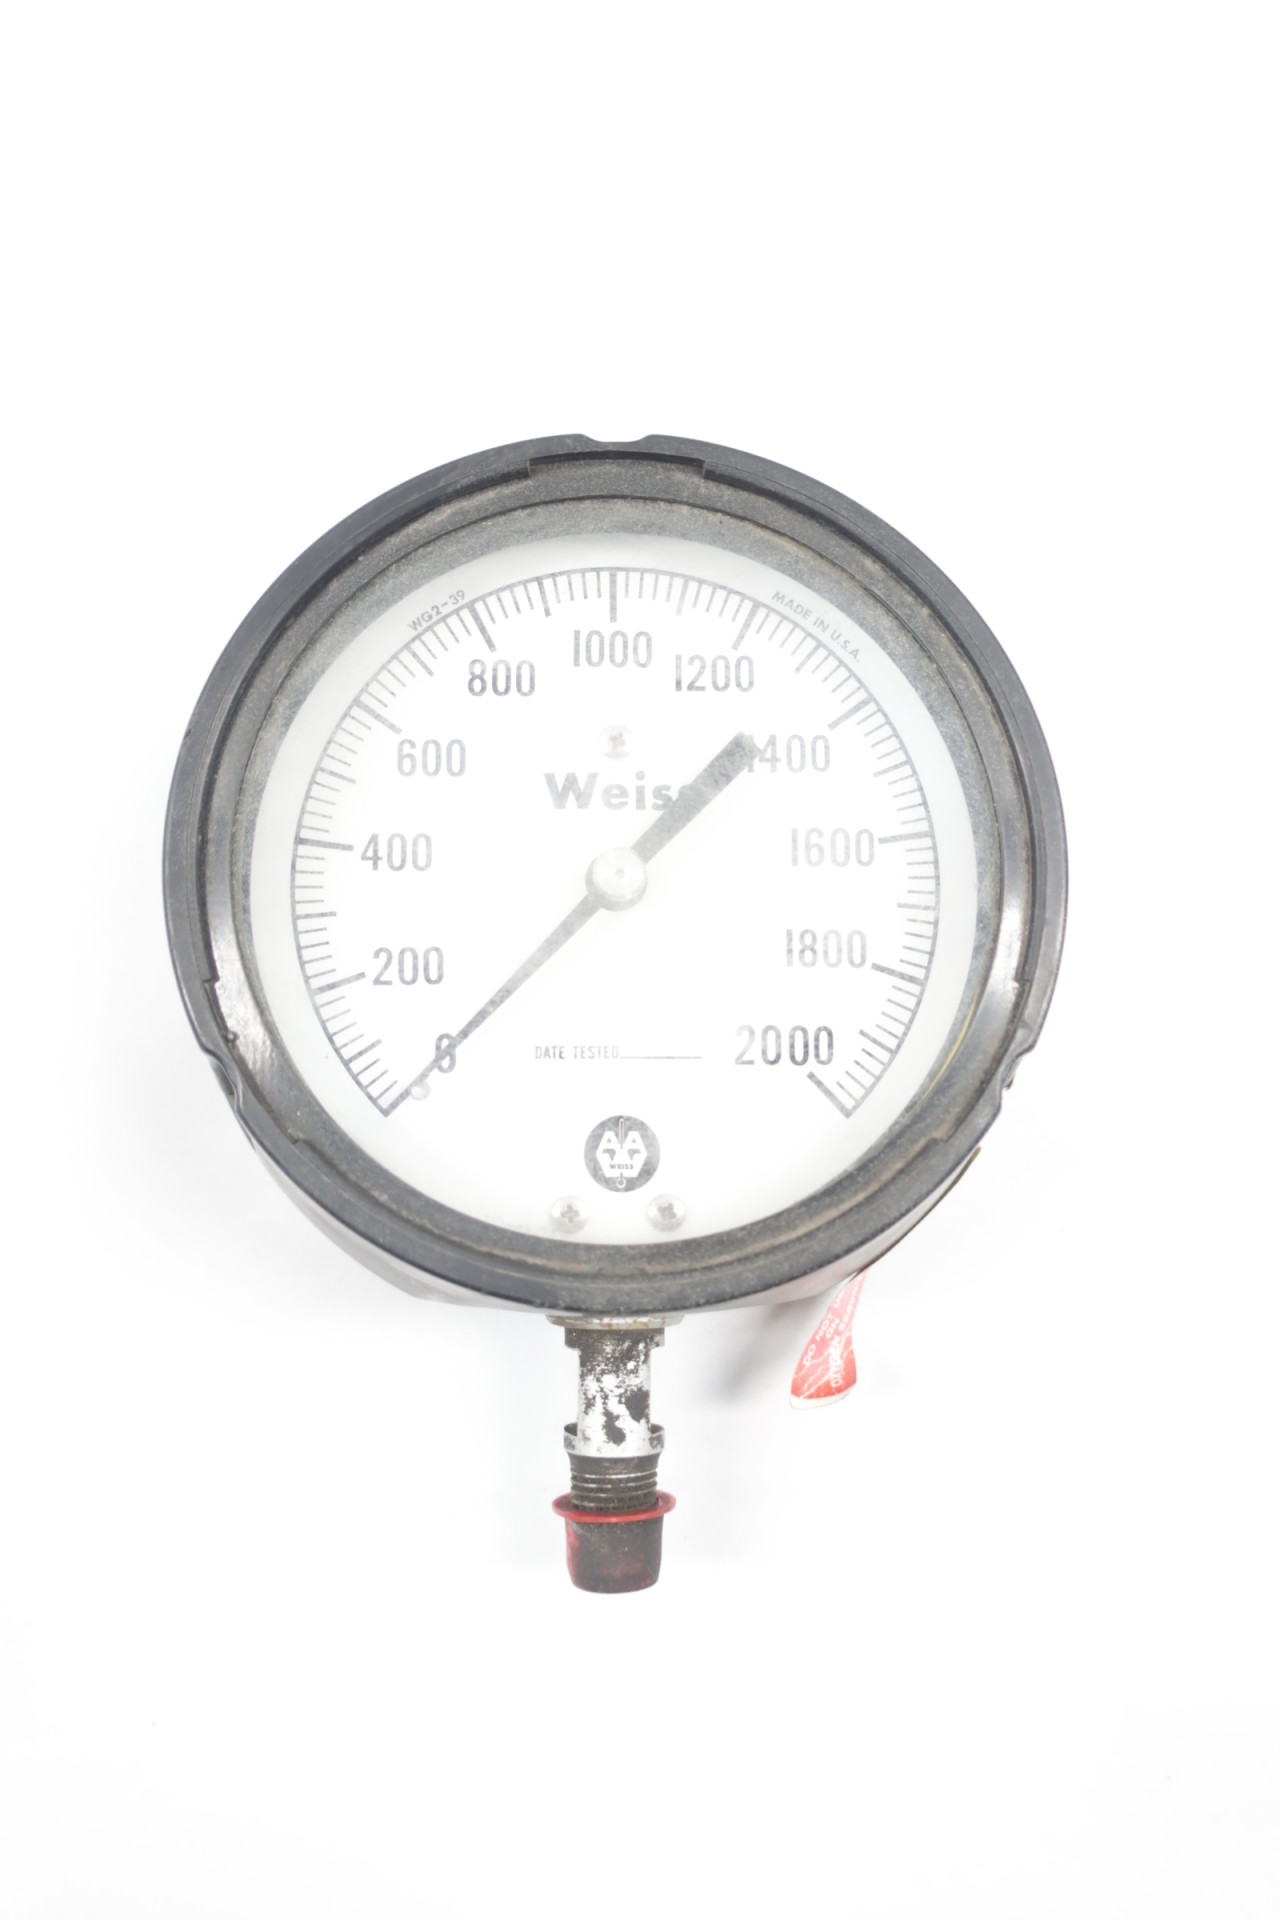 Details about   WEISS 4 1/2" GUAGE 0-100 PSI PN:WG2-8 